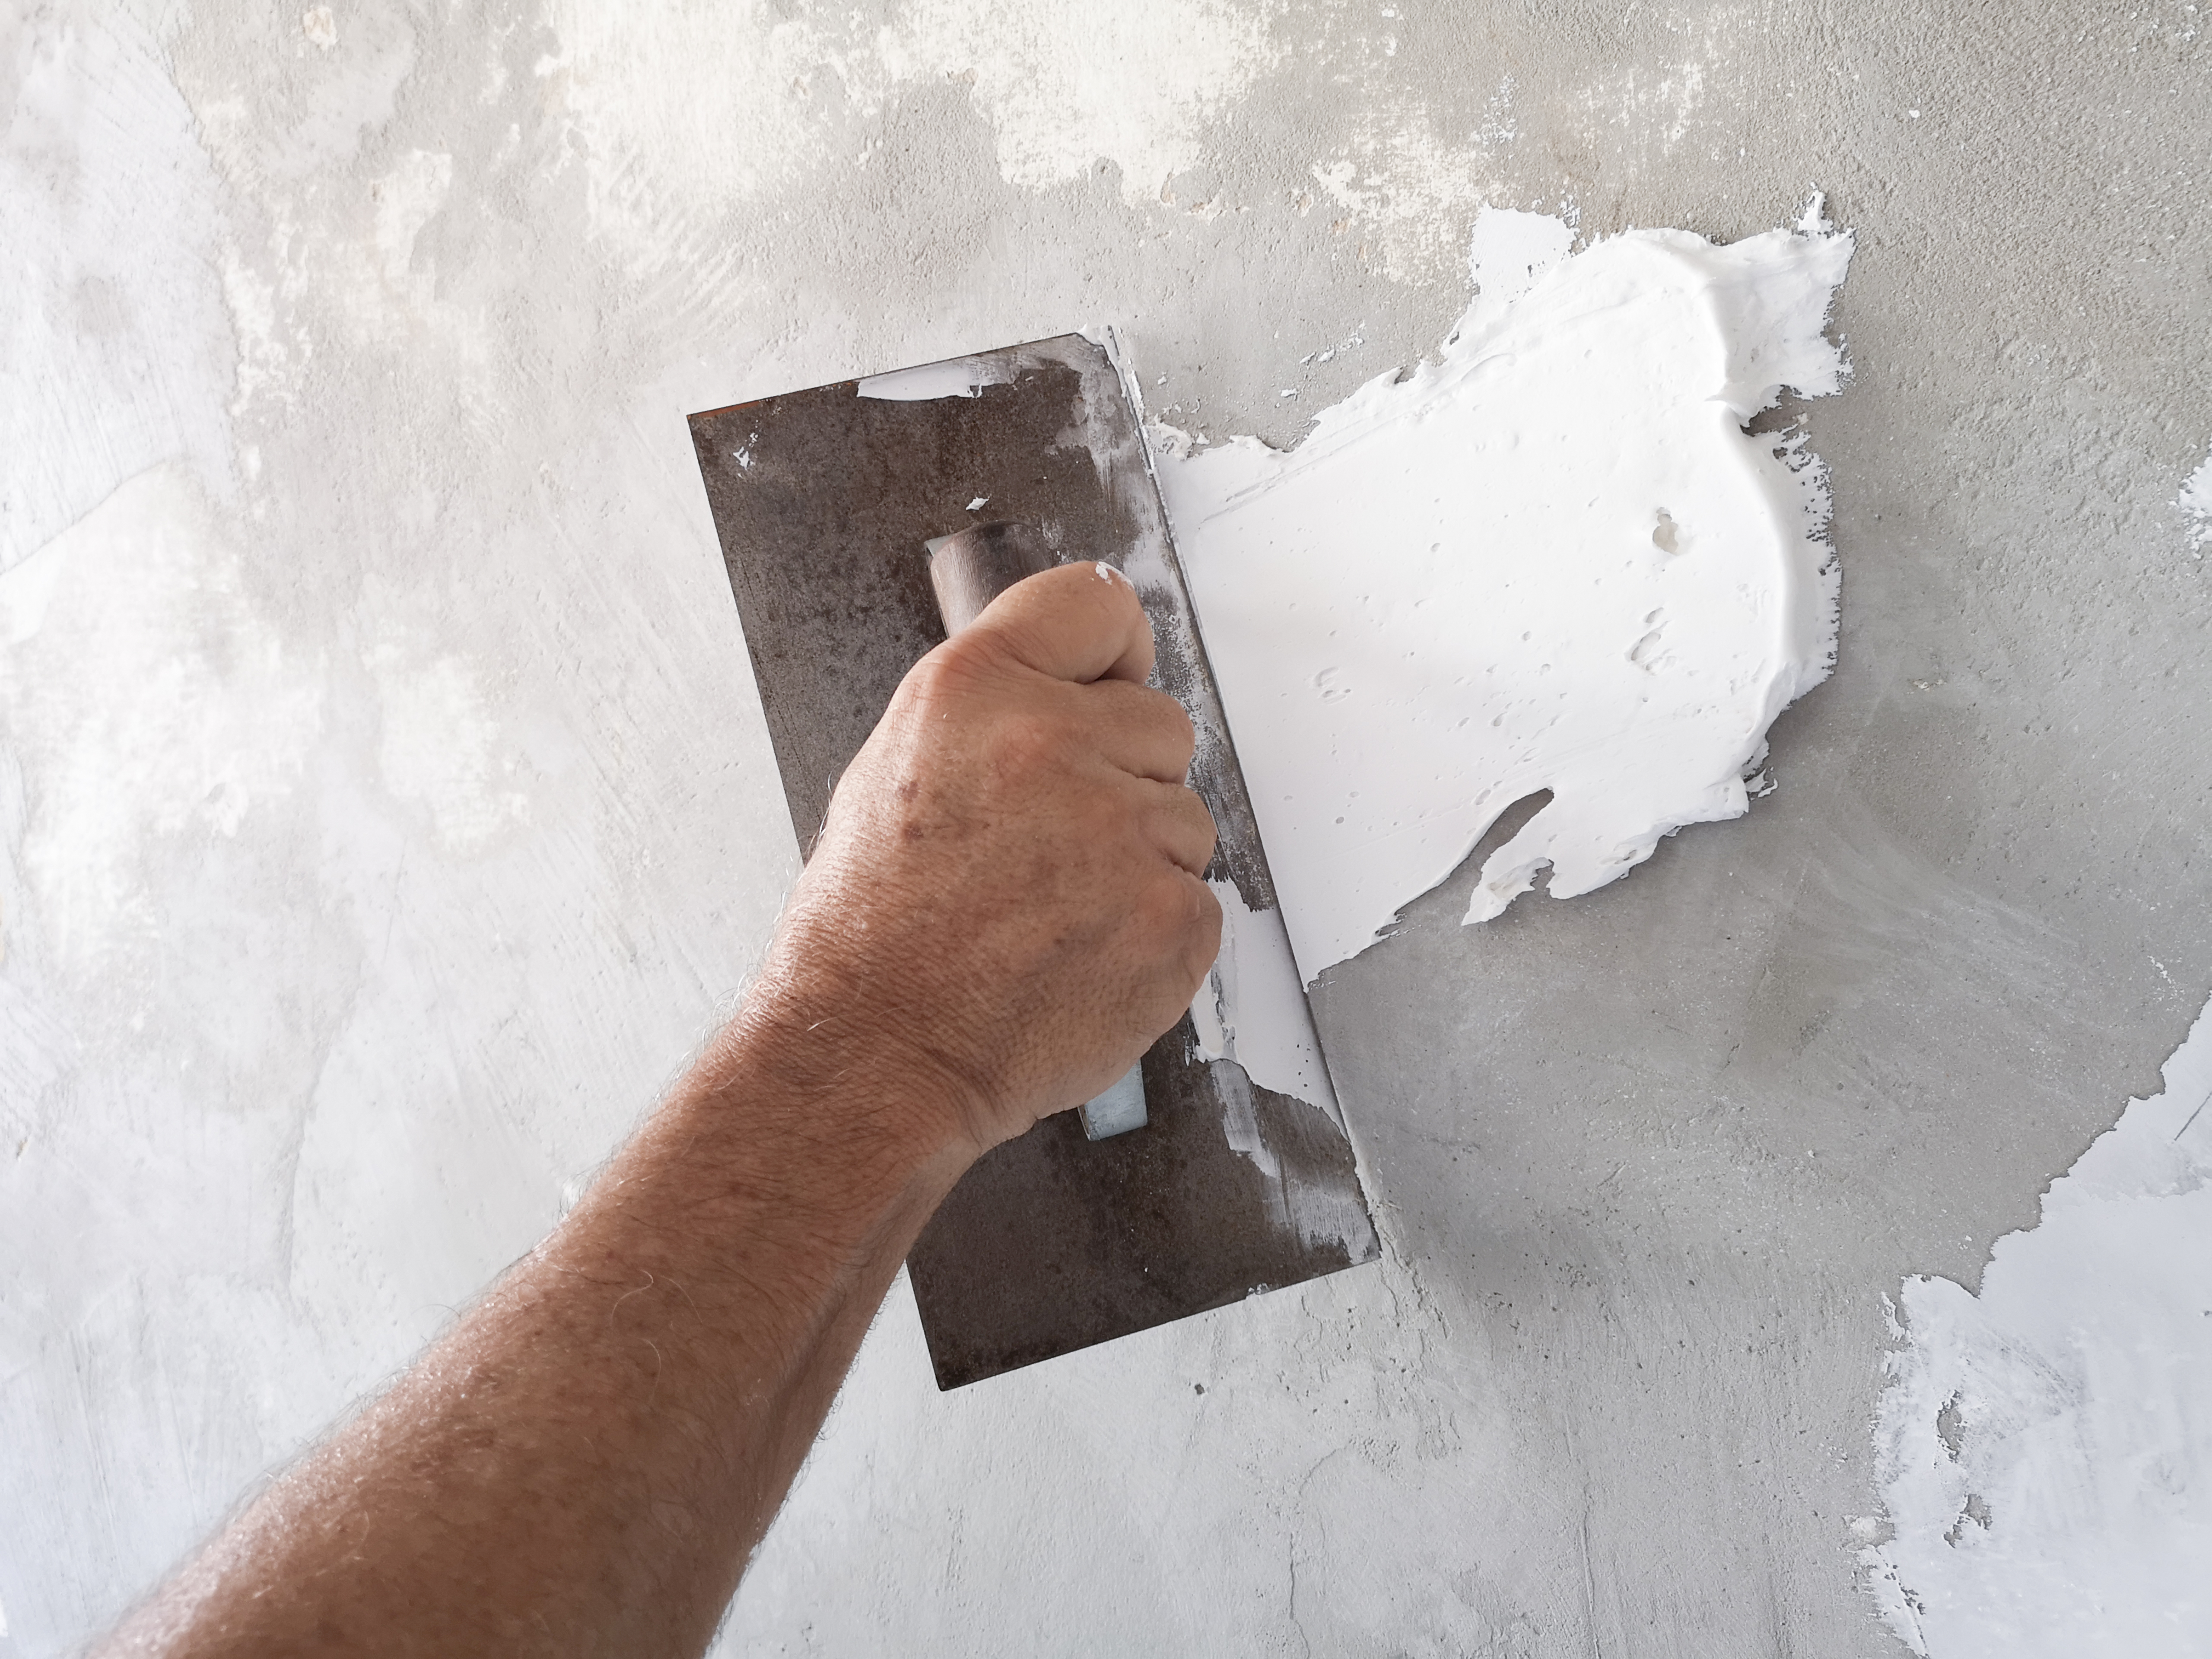 How to patch and repair plaster walls with drywall for the best